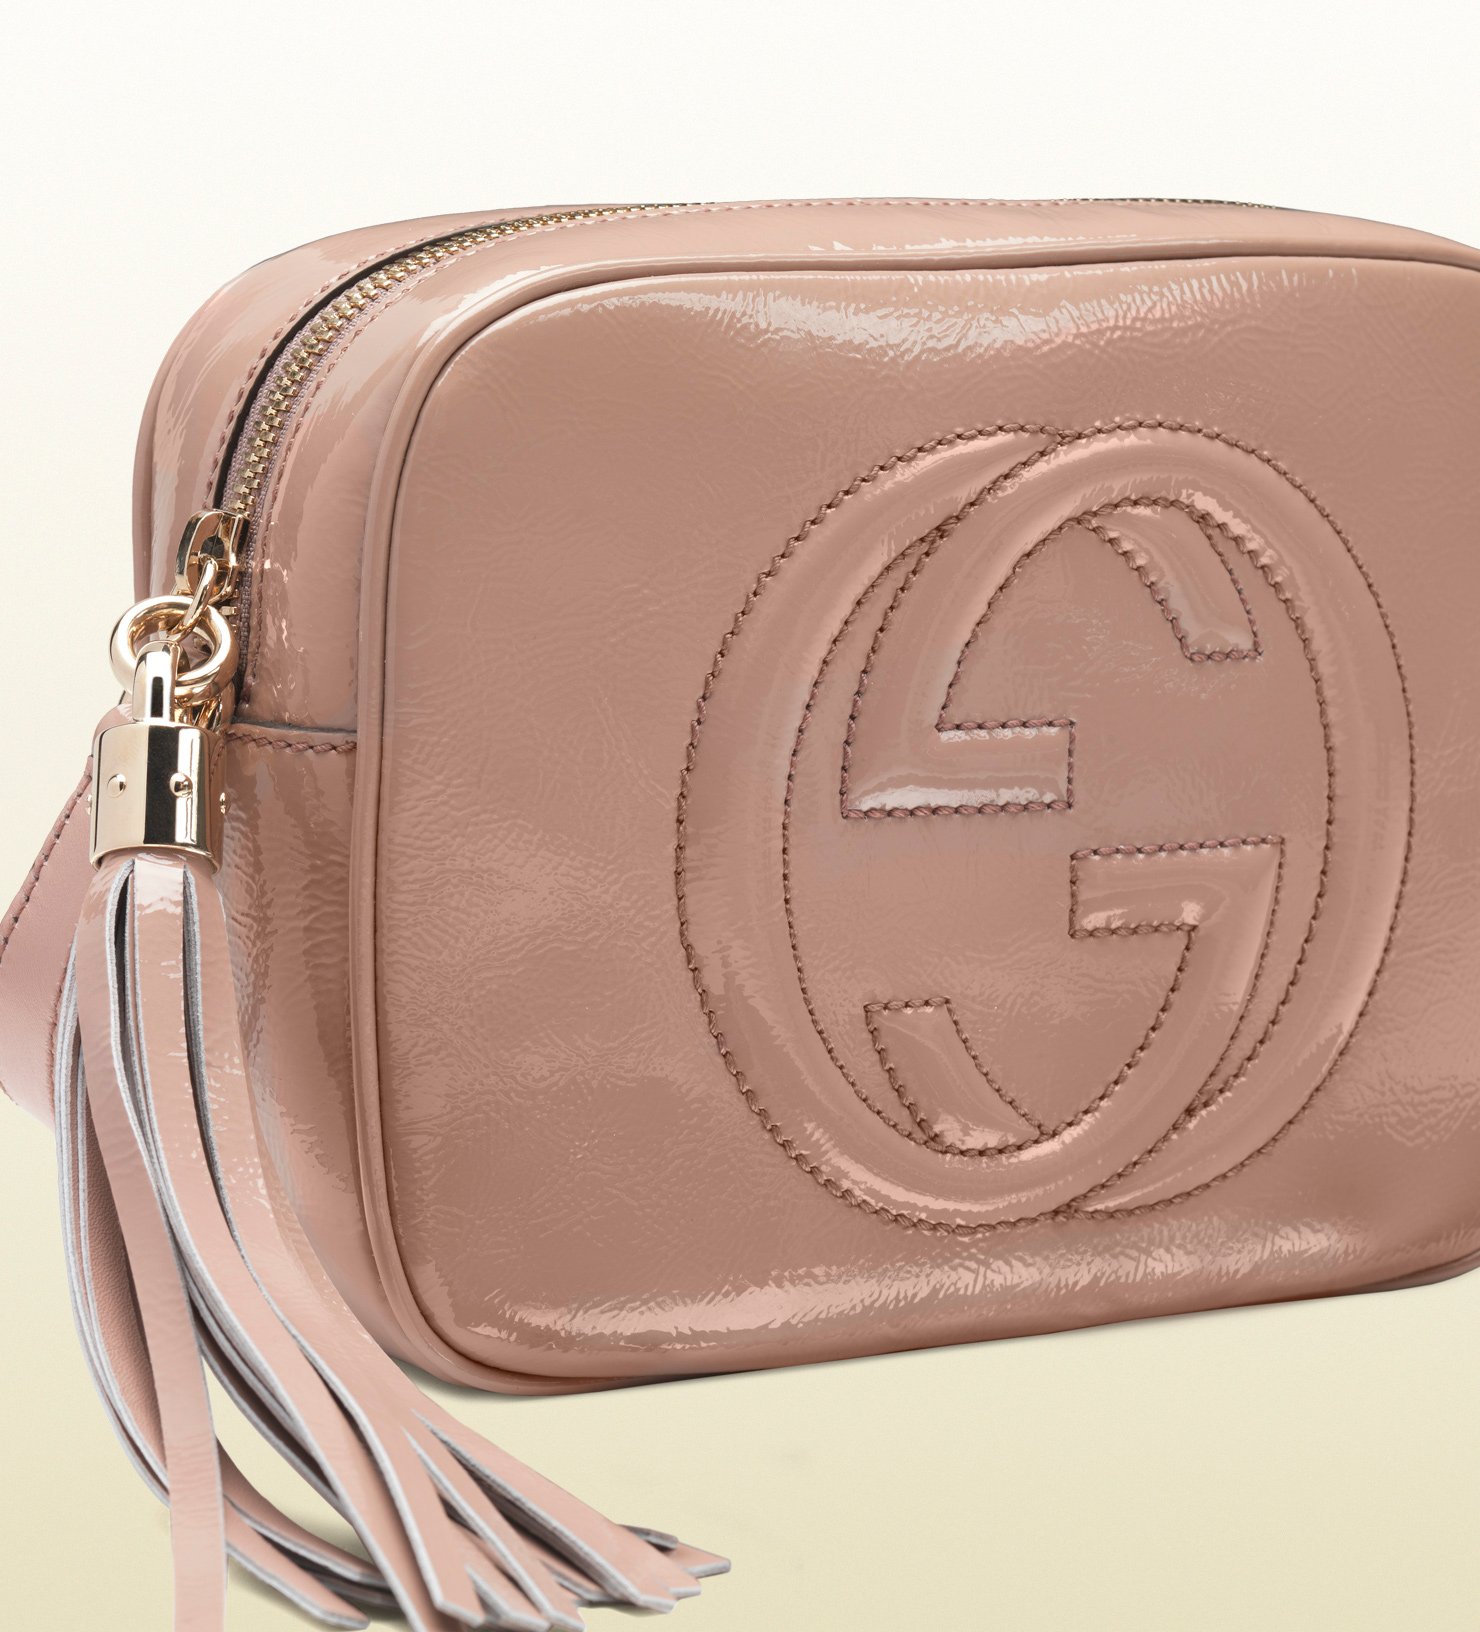 Lyst - Gucci Soho Patent Leather Disco Bag in Pink